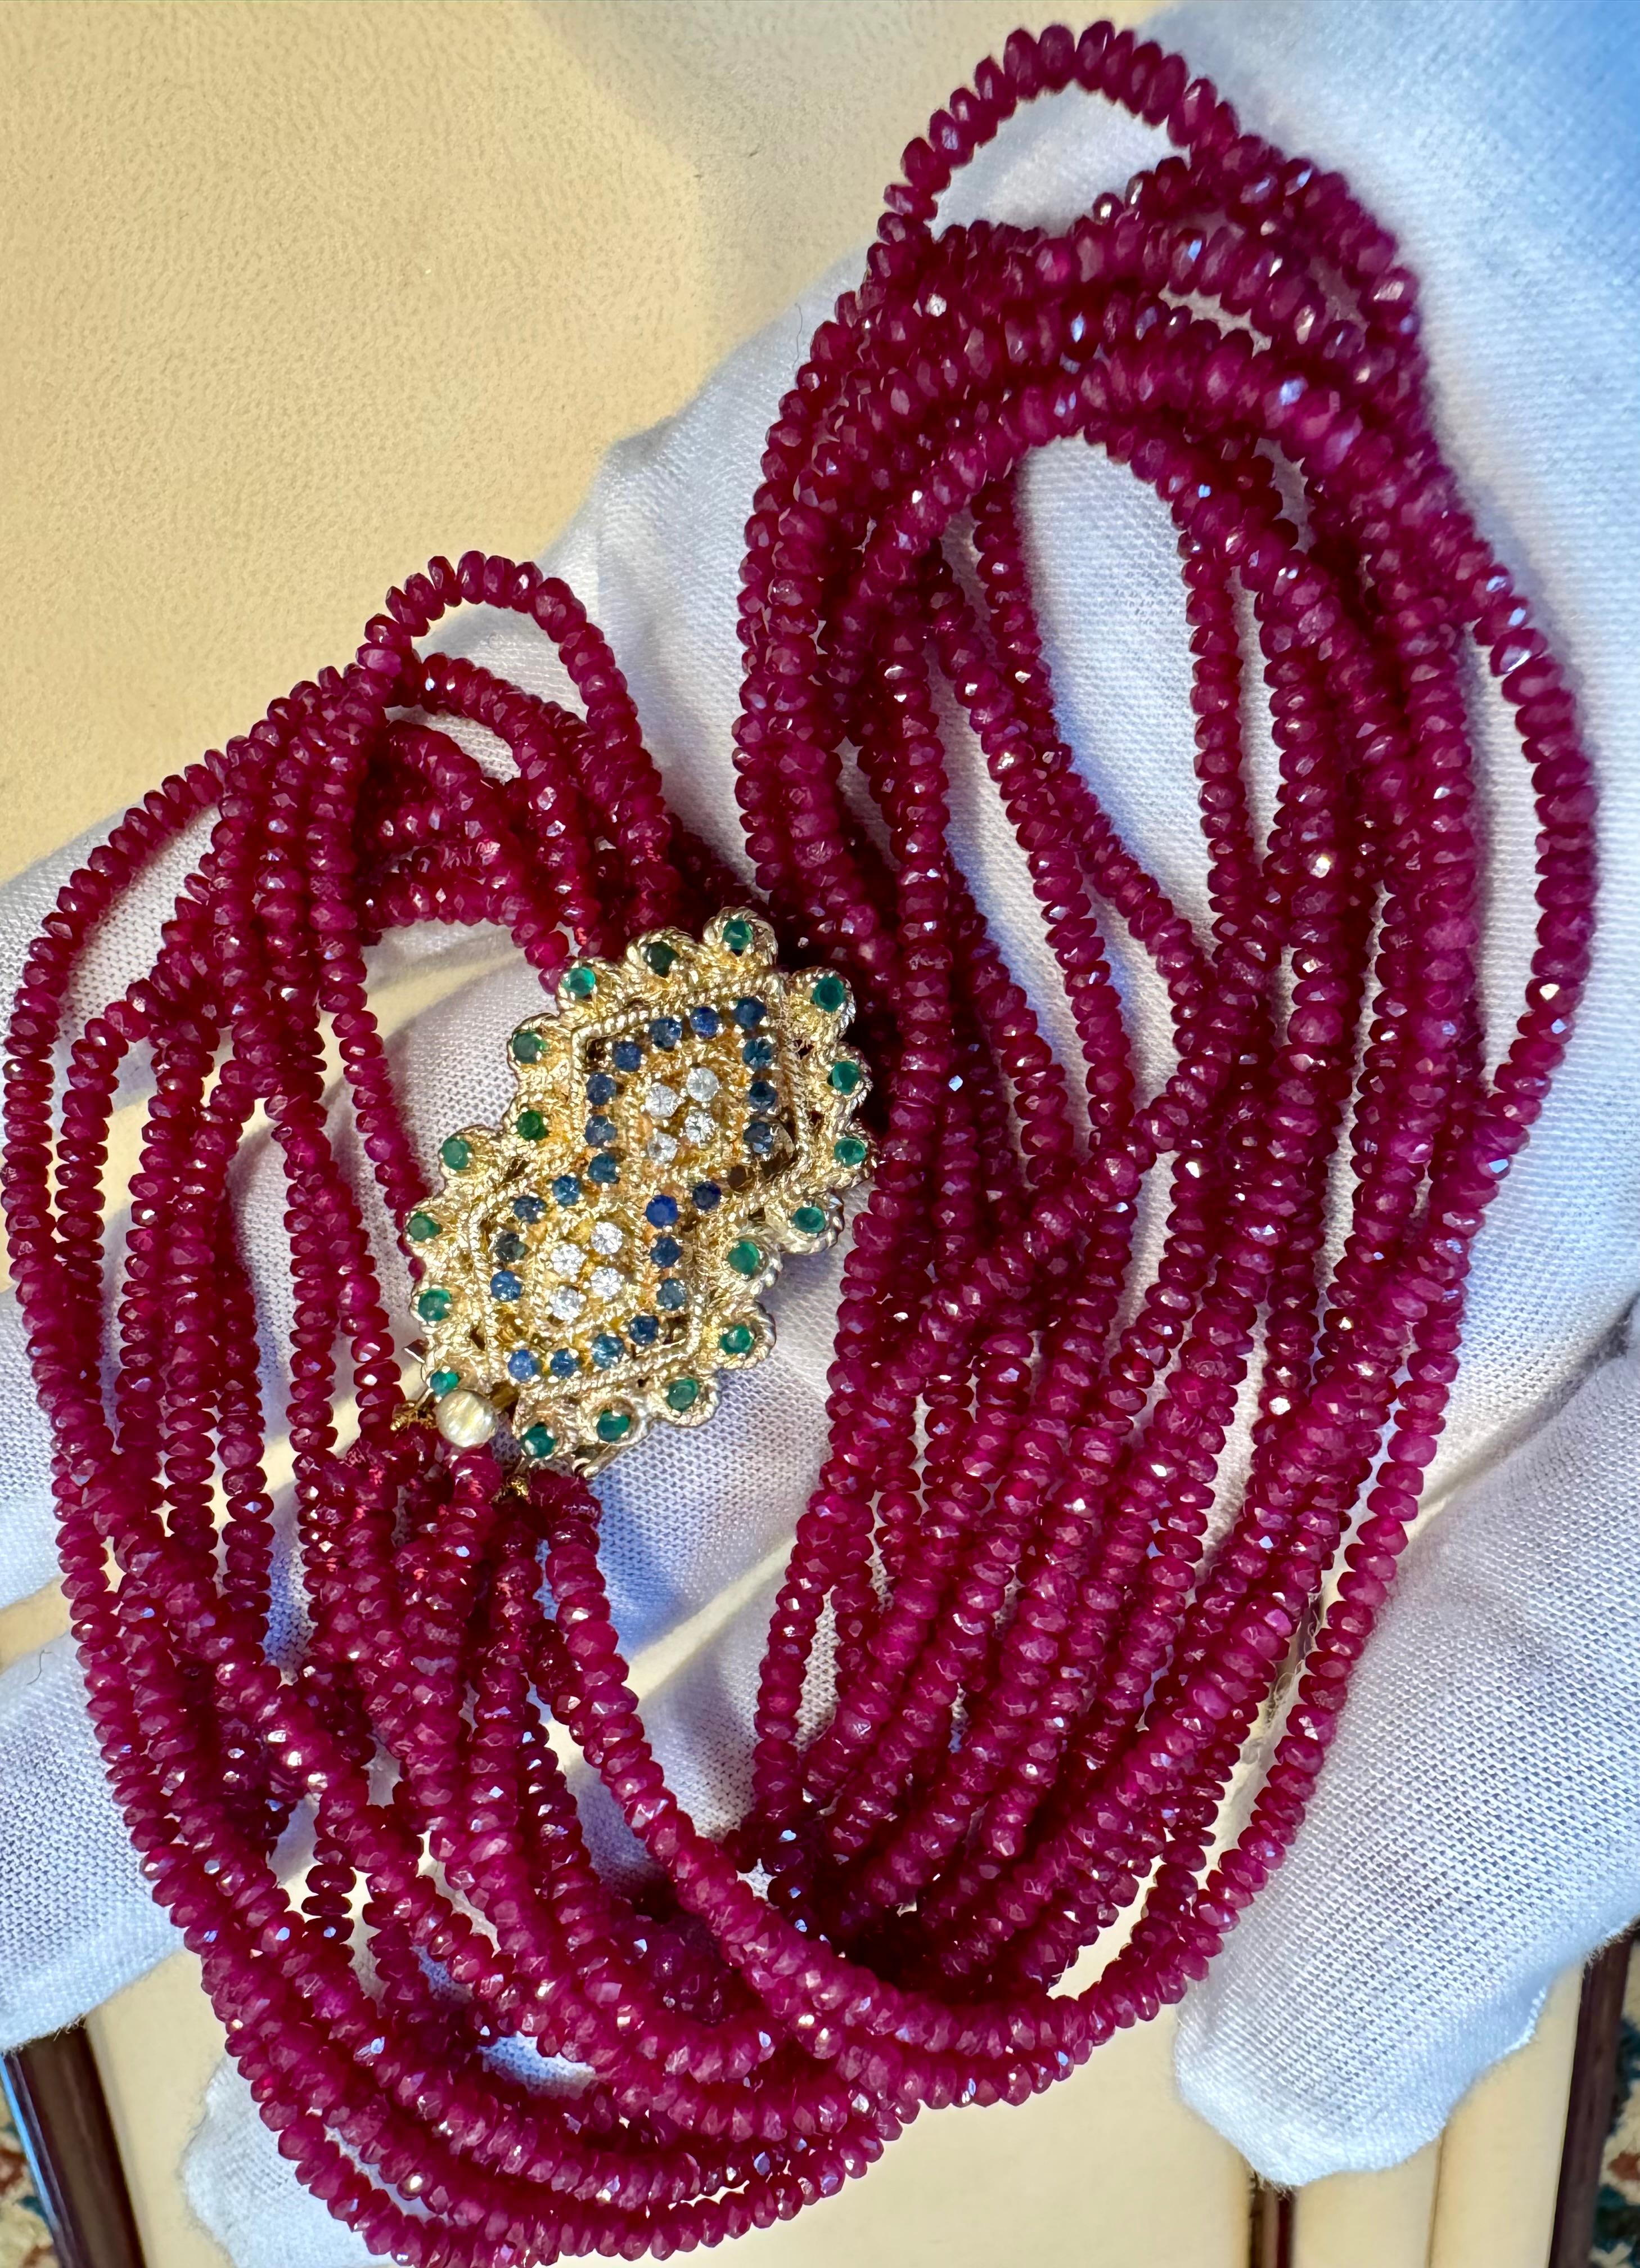 Approximately 275 Ct , 8 Layer Natural  Ruby  Bead Necklace 14 Karat Yellow Gold Diamond Clasp which has small emerald sapphires and diamonds.
This spectacular Necklace   consisting of approximately 275 Ct   of  Fine  natural beads of Ruby
A